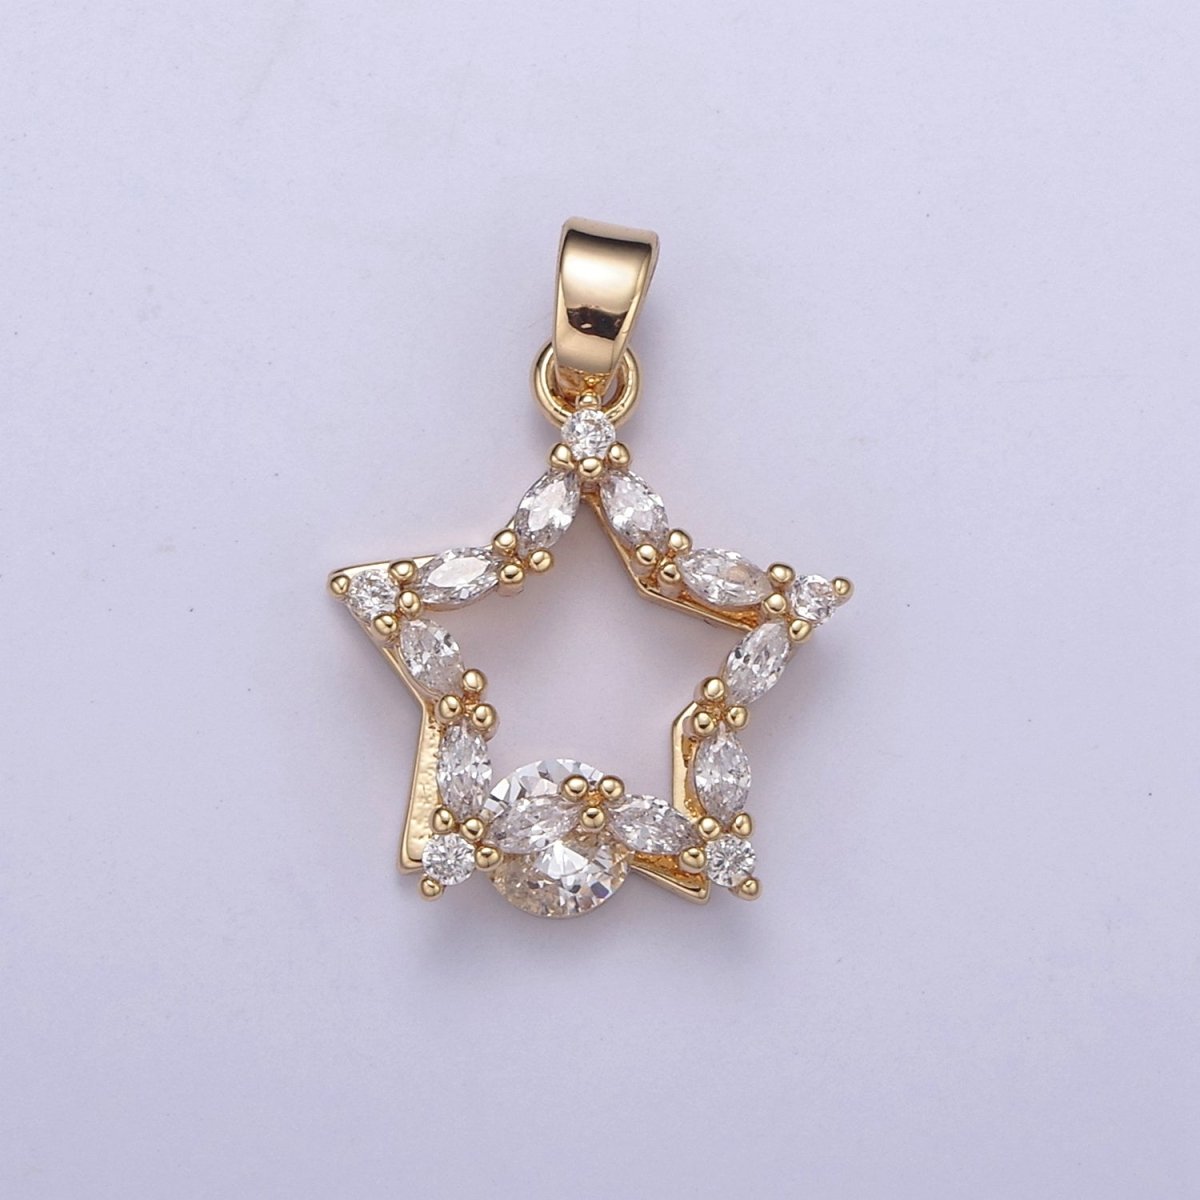 Gold Filled Star Cubic Zirconia Charm - CZ Shiny Star Celestial Night Sky Constellation Galaxy Wholesale Charms H-419 - DLUXCA